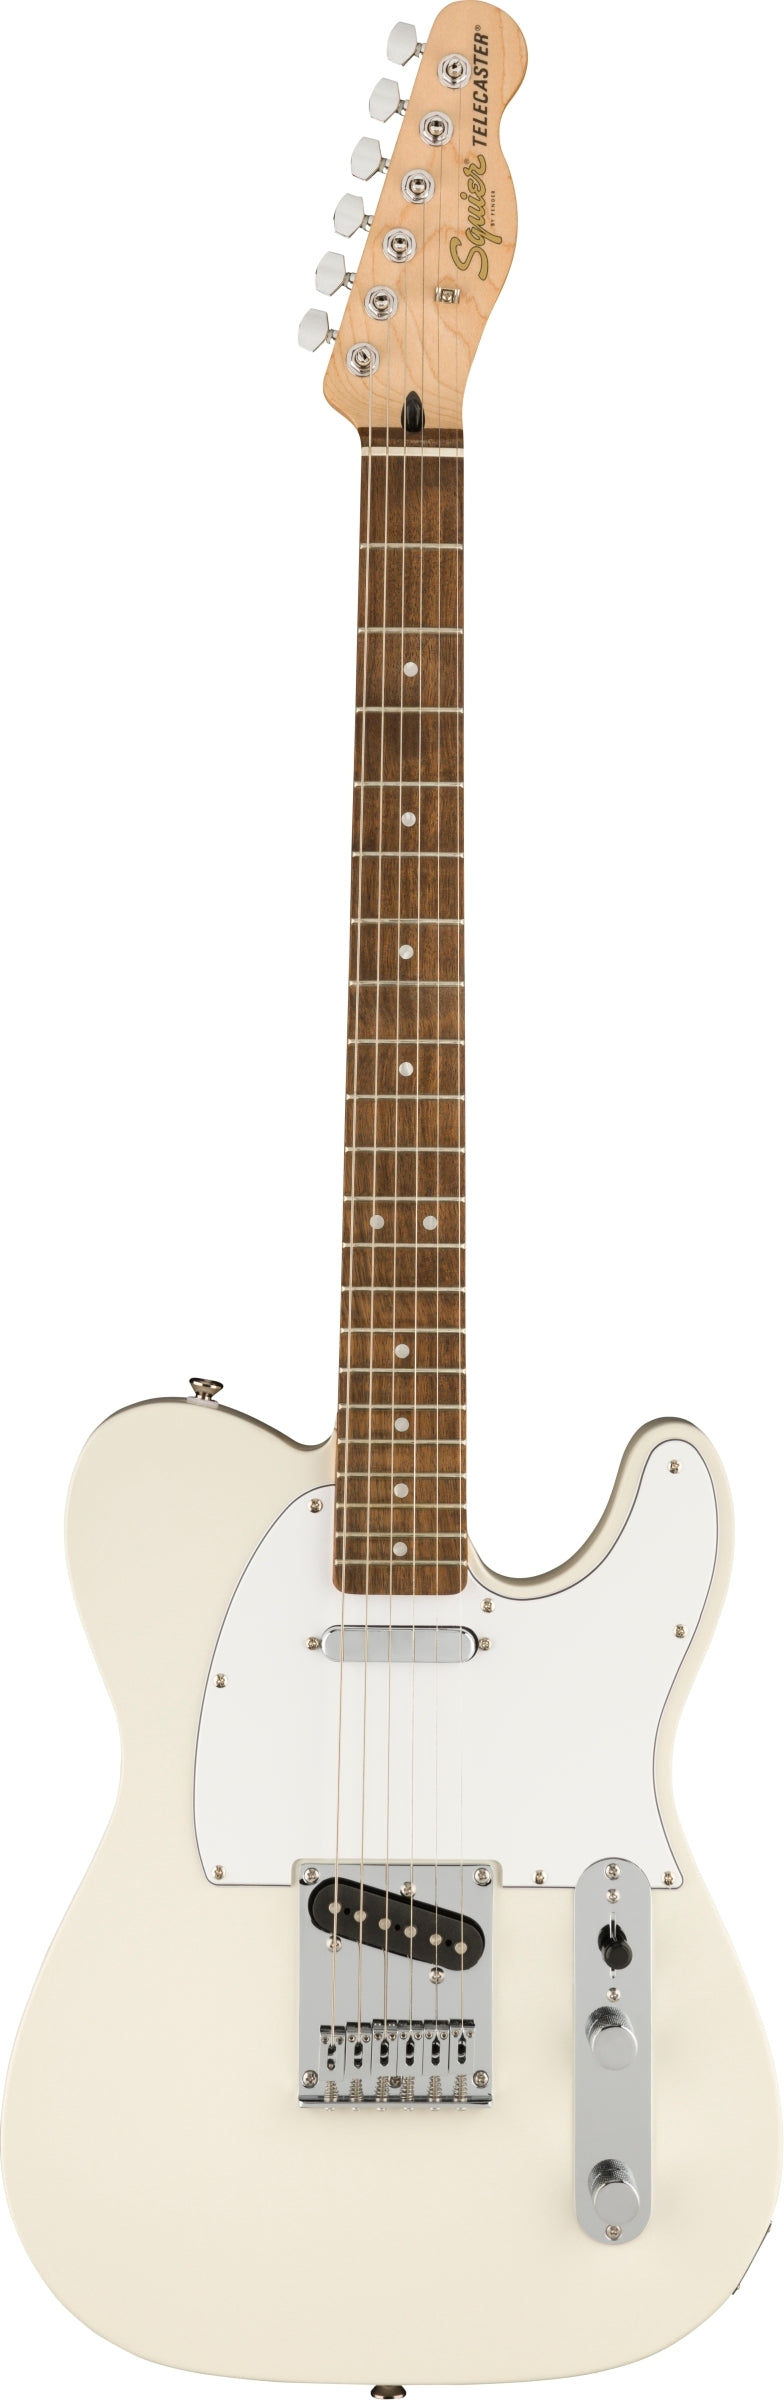 Fender Squier Affinity Series Telecaster, Olympic White